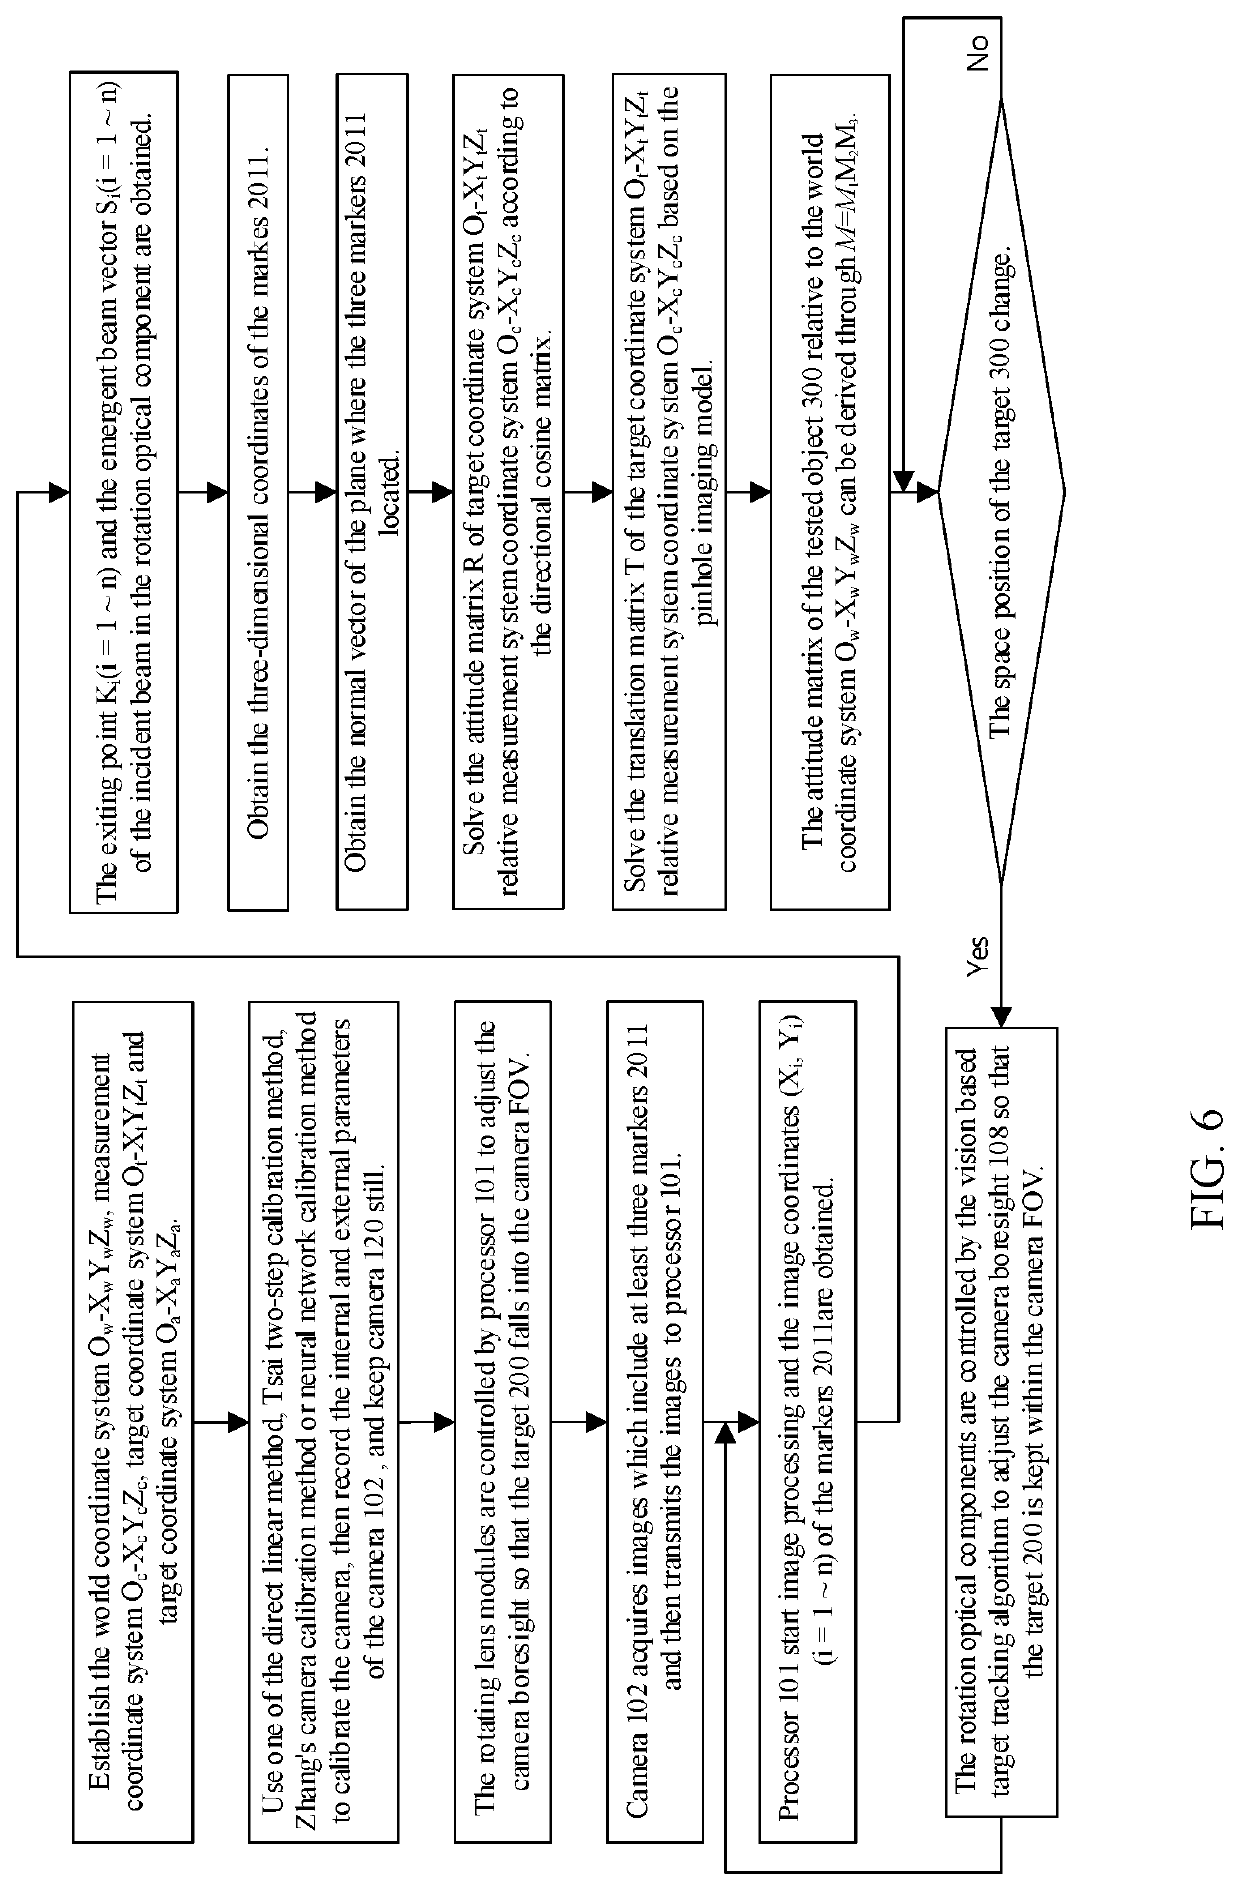 Six degree-of-freedom (DOF) measuring system and method